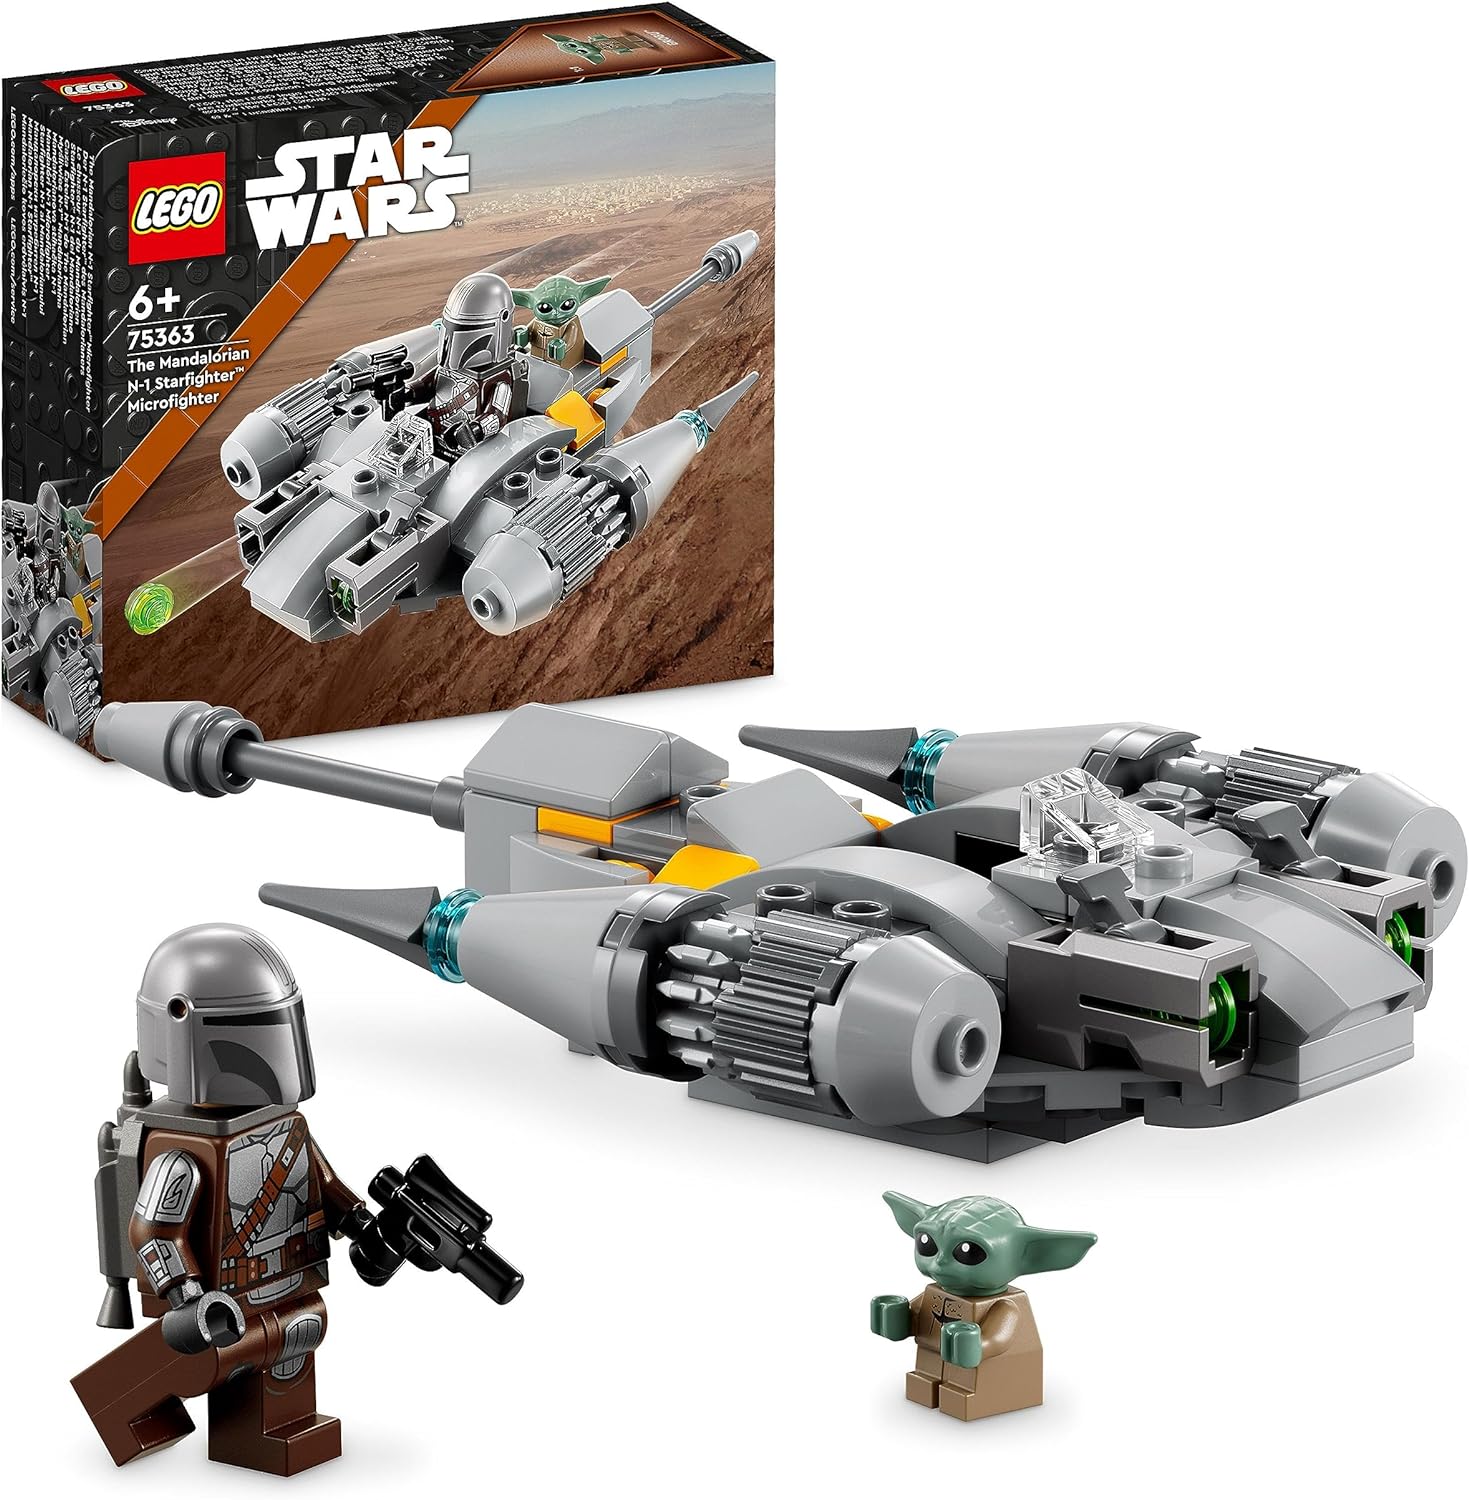 LEGO 75363 Star Wars N-1 Starfighter of the Mandalorian - Microfighter Micro Building Toy, The Book of Boba Fett Vehicle with Baby Yoda Figure Grogu, Gift for Children, Boys, Girls from 6 Years
